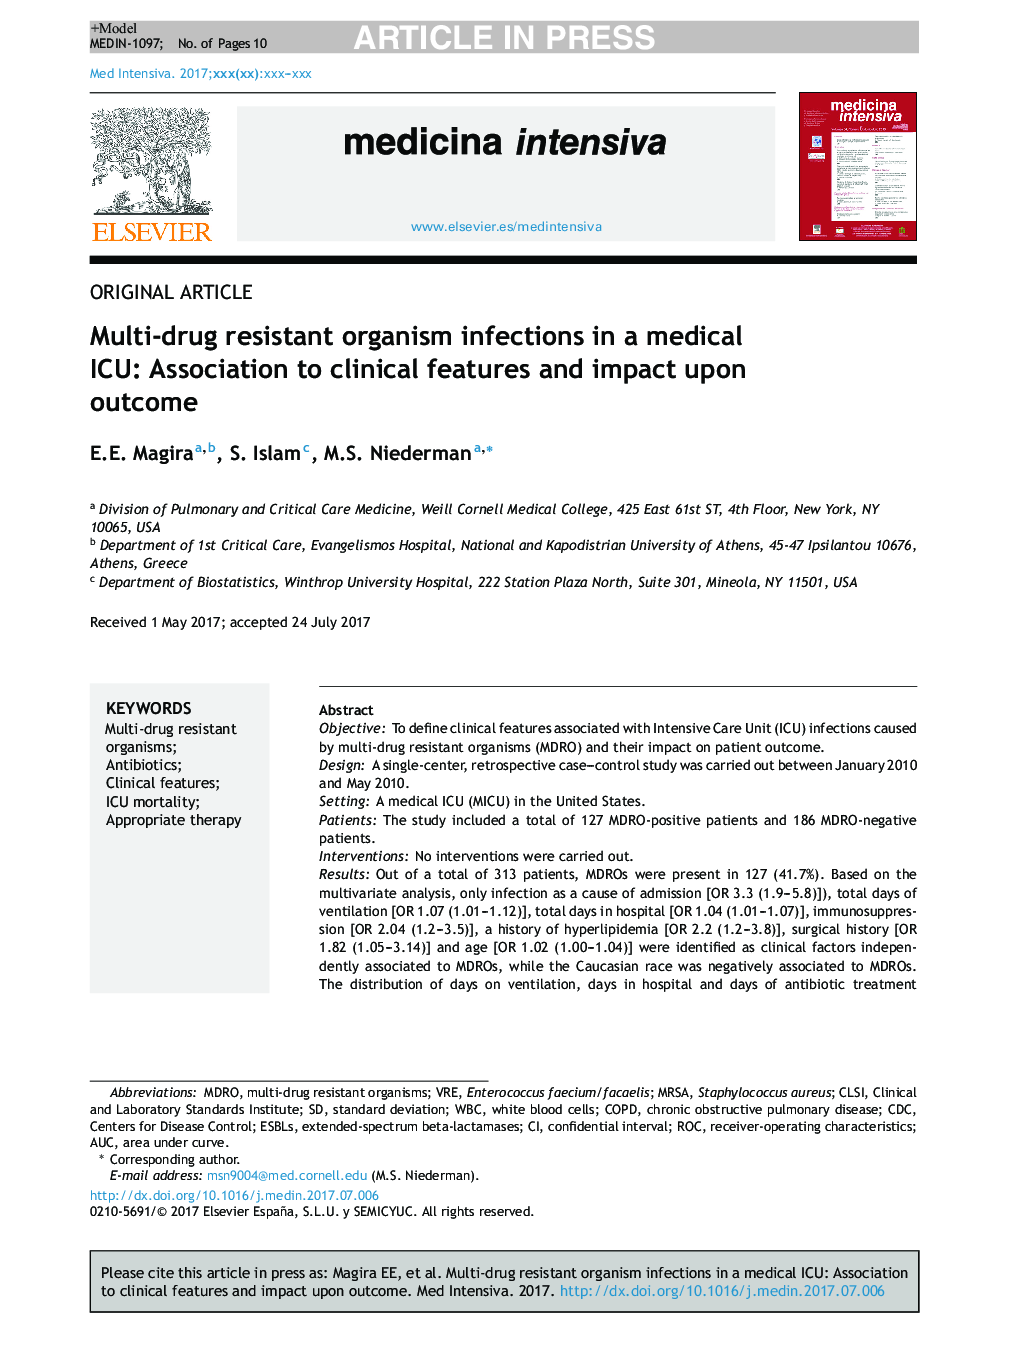 Multi-drug resistant organism infections in a medical ICU: Association to clinical features and impact upon outcome